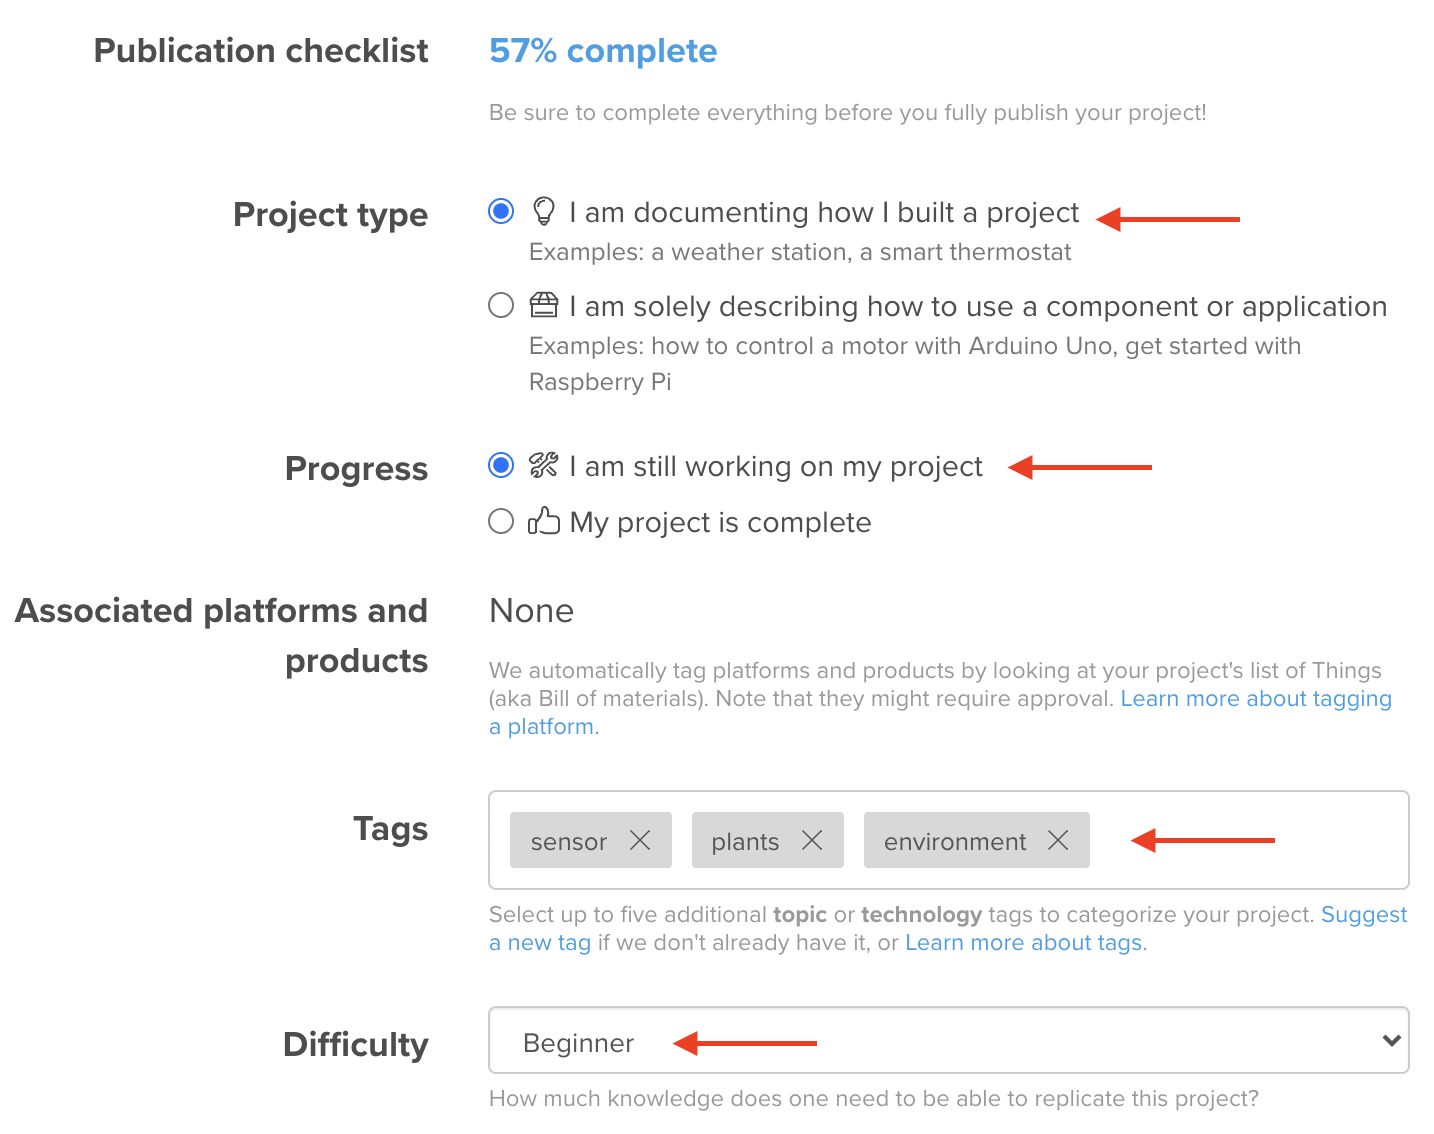 Select 'I am documenting how I built a project' and 'I am still working on my project'. Add some relevant tags and select a difficulty level